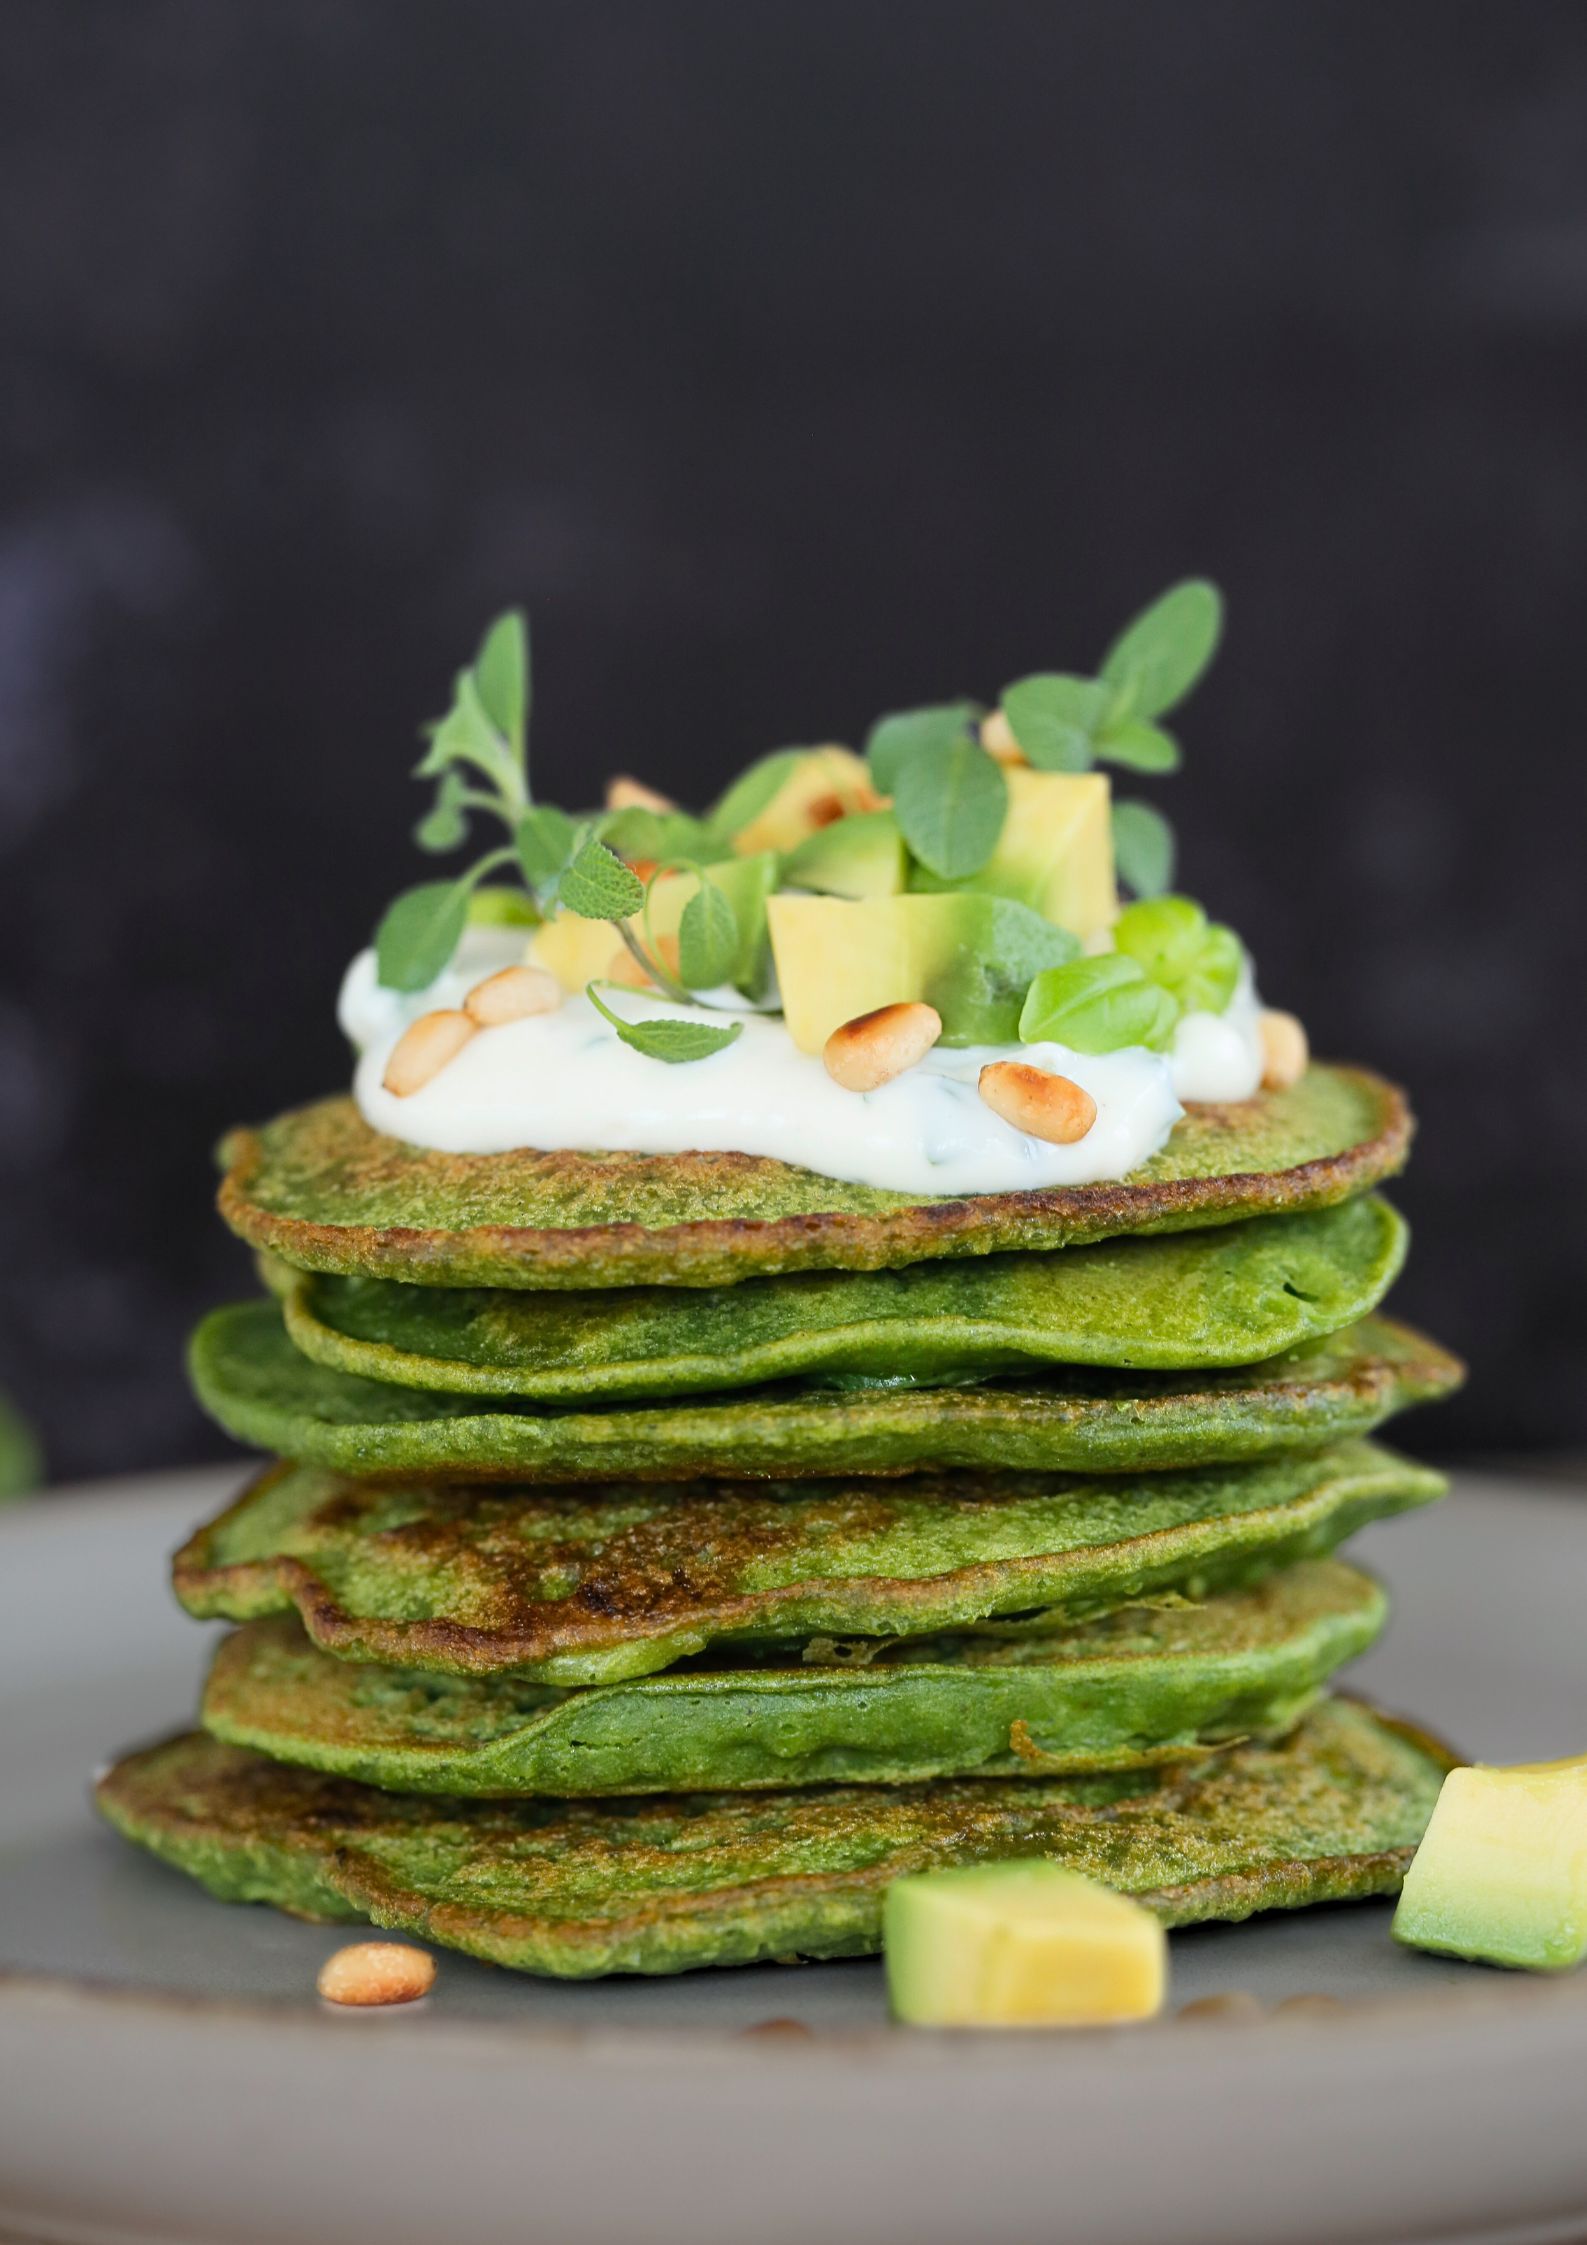 A delicious savoury breakfast or even lunch or dinner these spring onion pancakes are quick, healthy, loaded with flavour and gluten free! #pancakes #breakfast #glutenfree #vegan